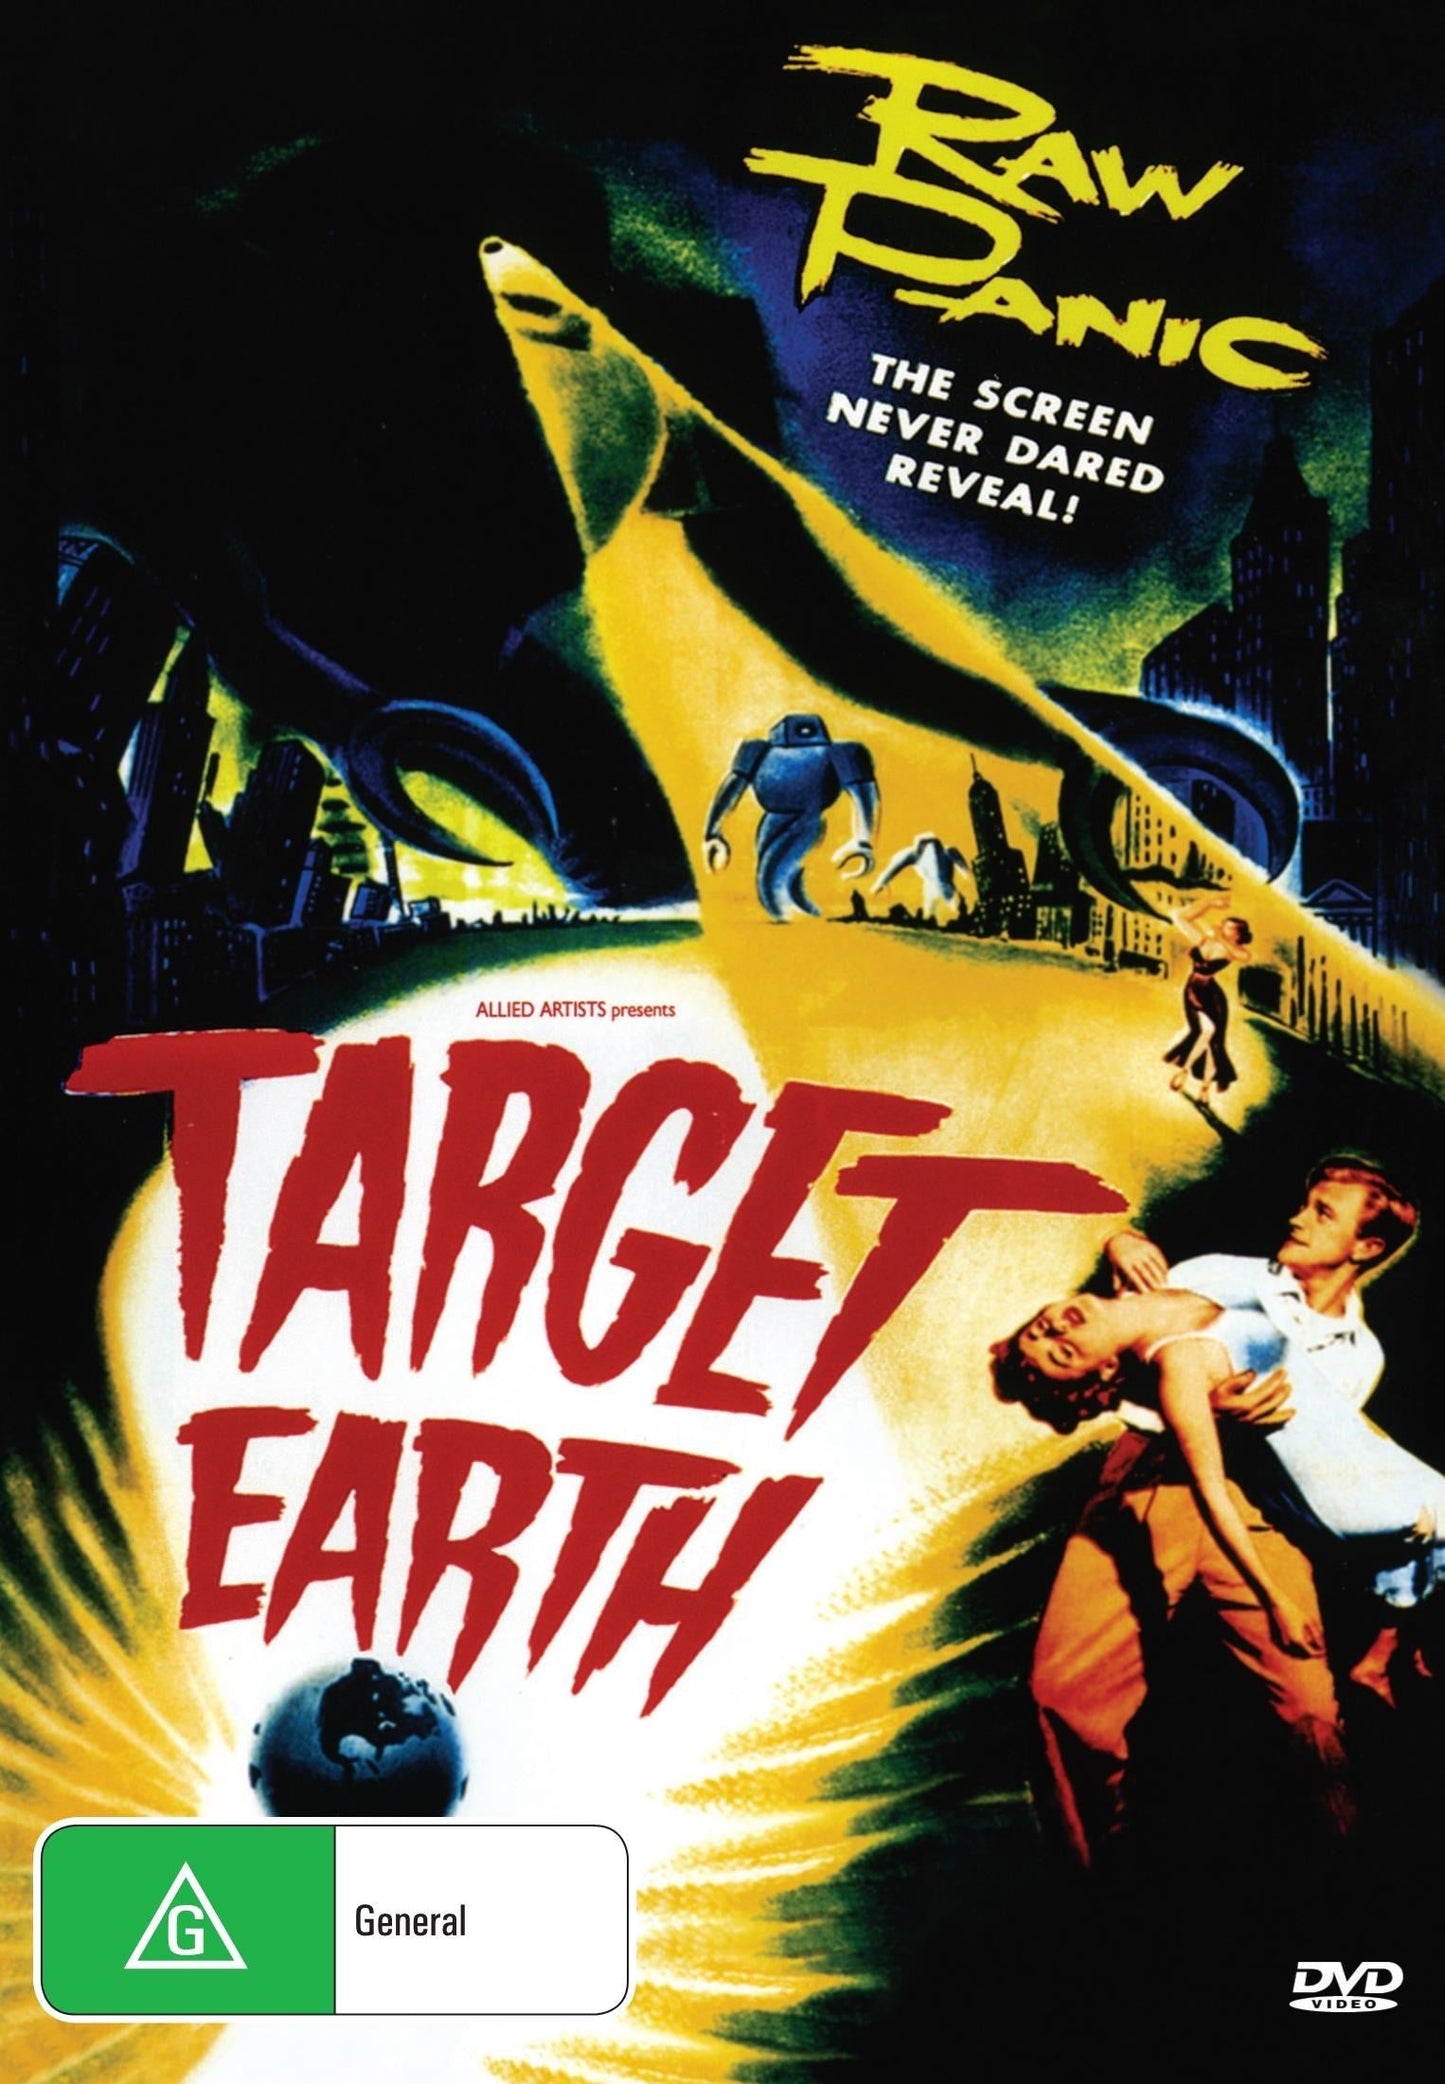 Target Earth rareandcollectibledvds